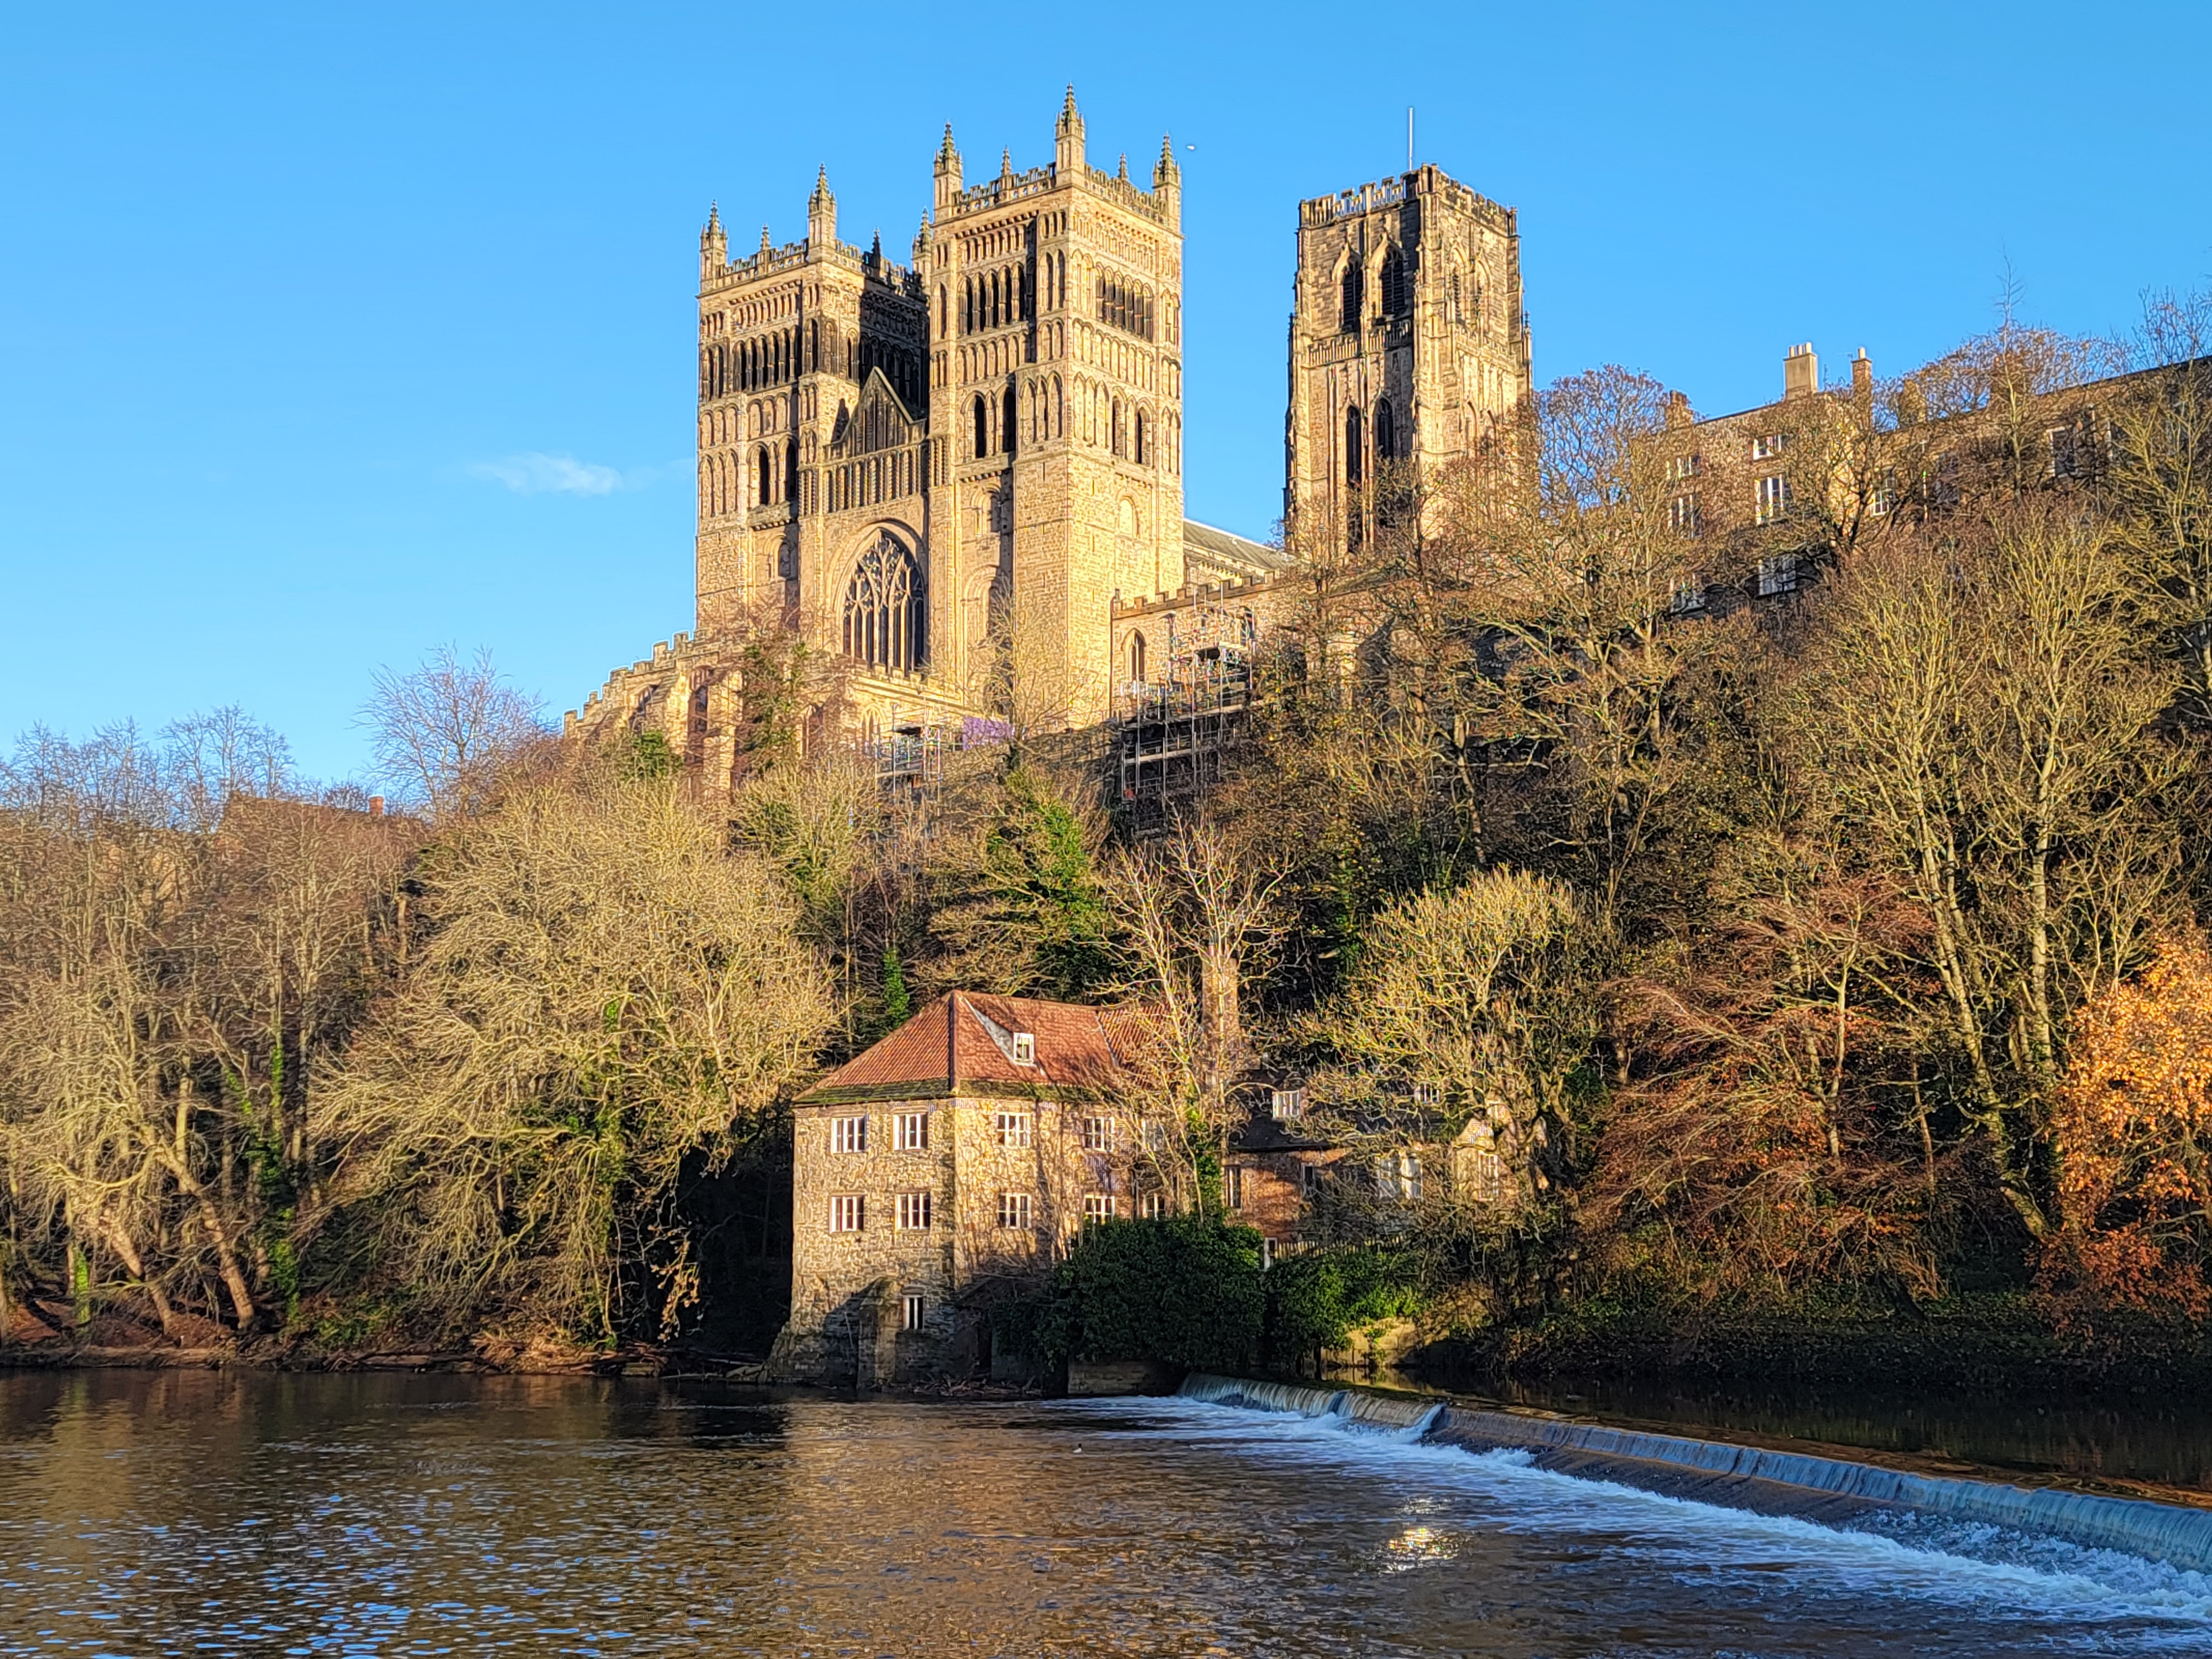 Durham Cathedral from across the river Wear